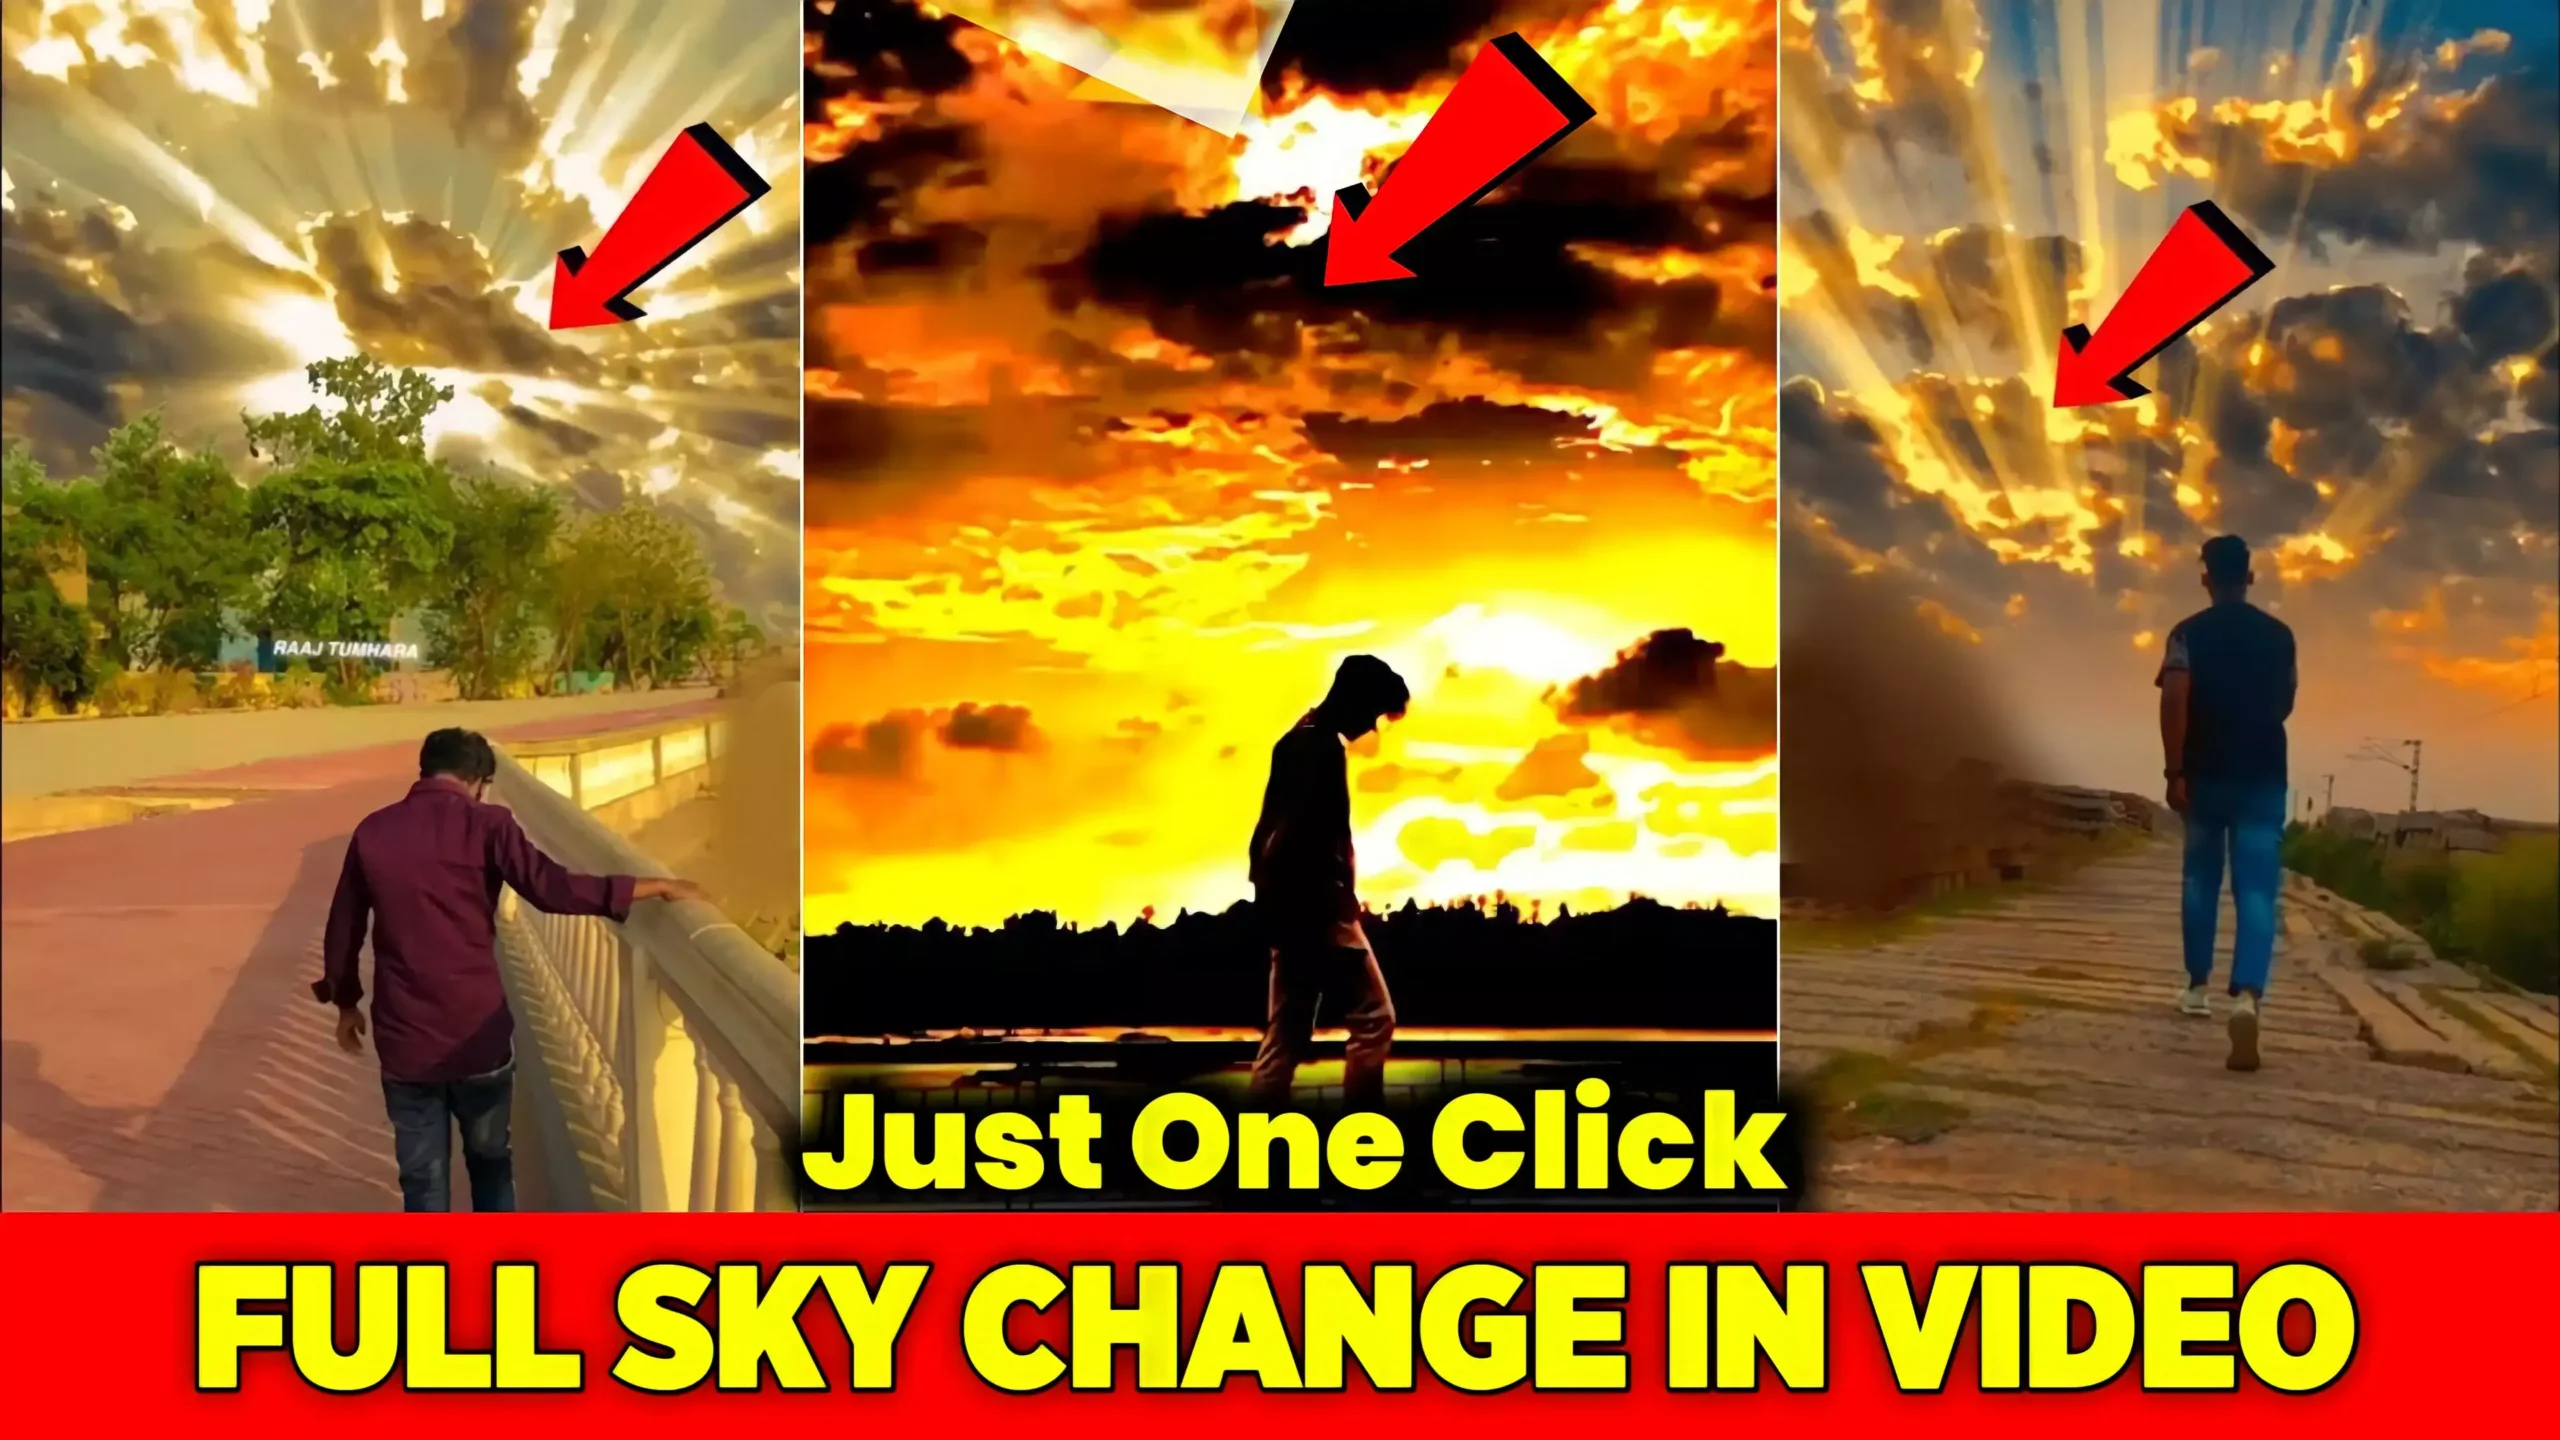 How to change sky in video in Android